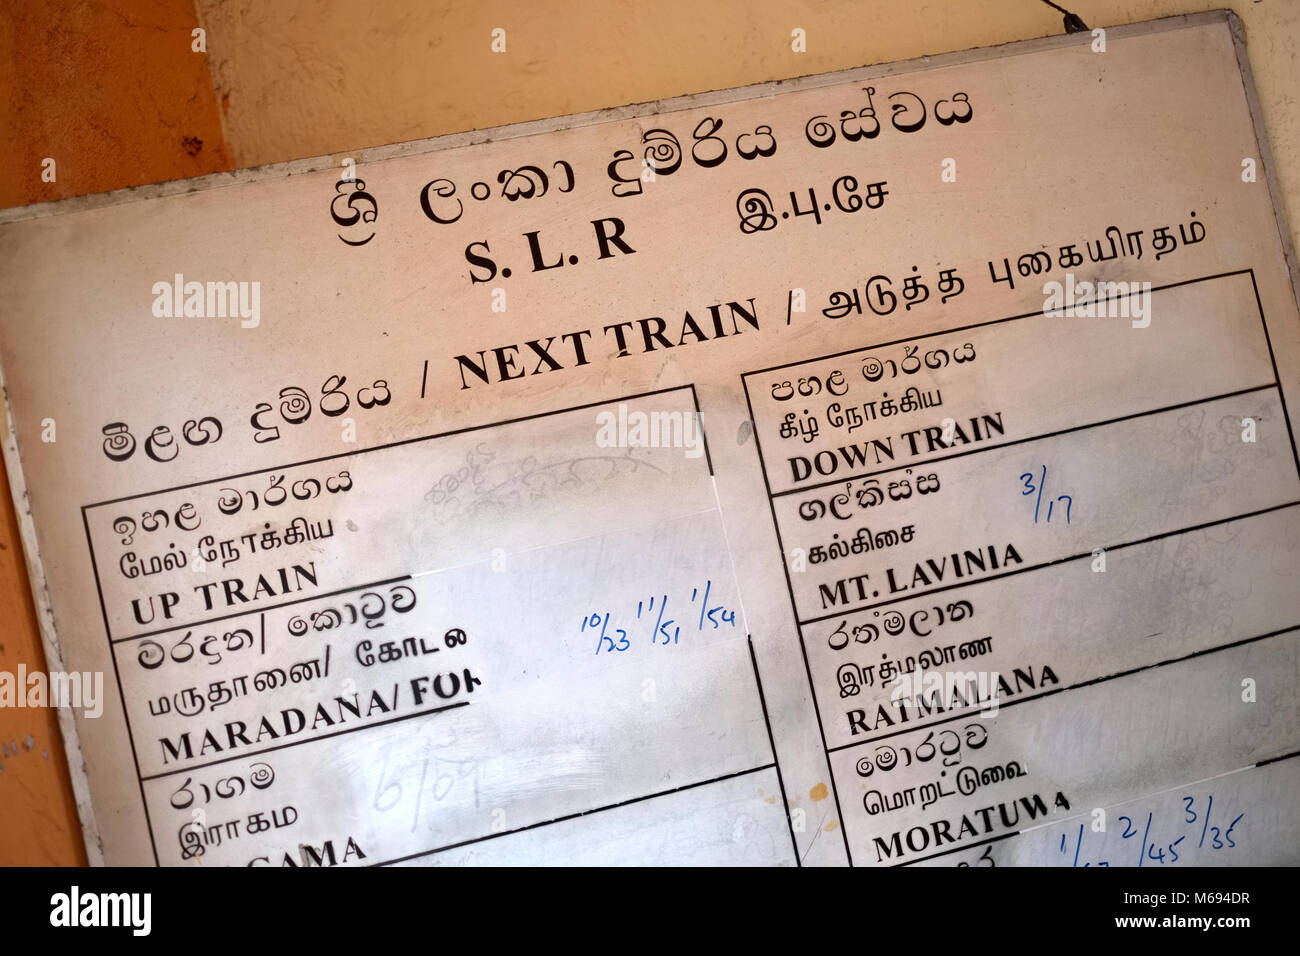 A sign showing train times at Mount Lavinia station near Colombo in Sri Lanka Stock Photo